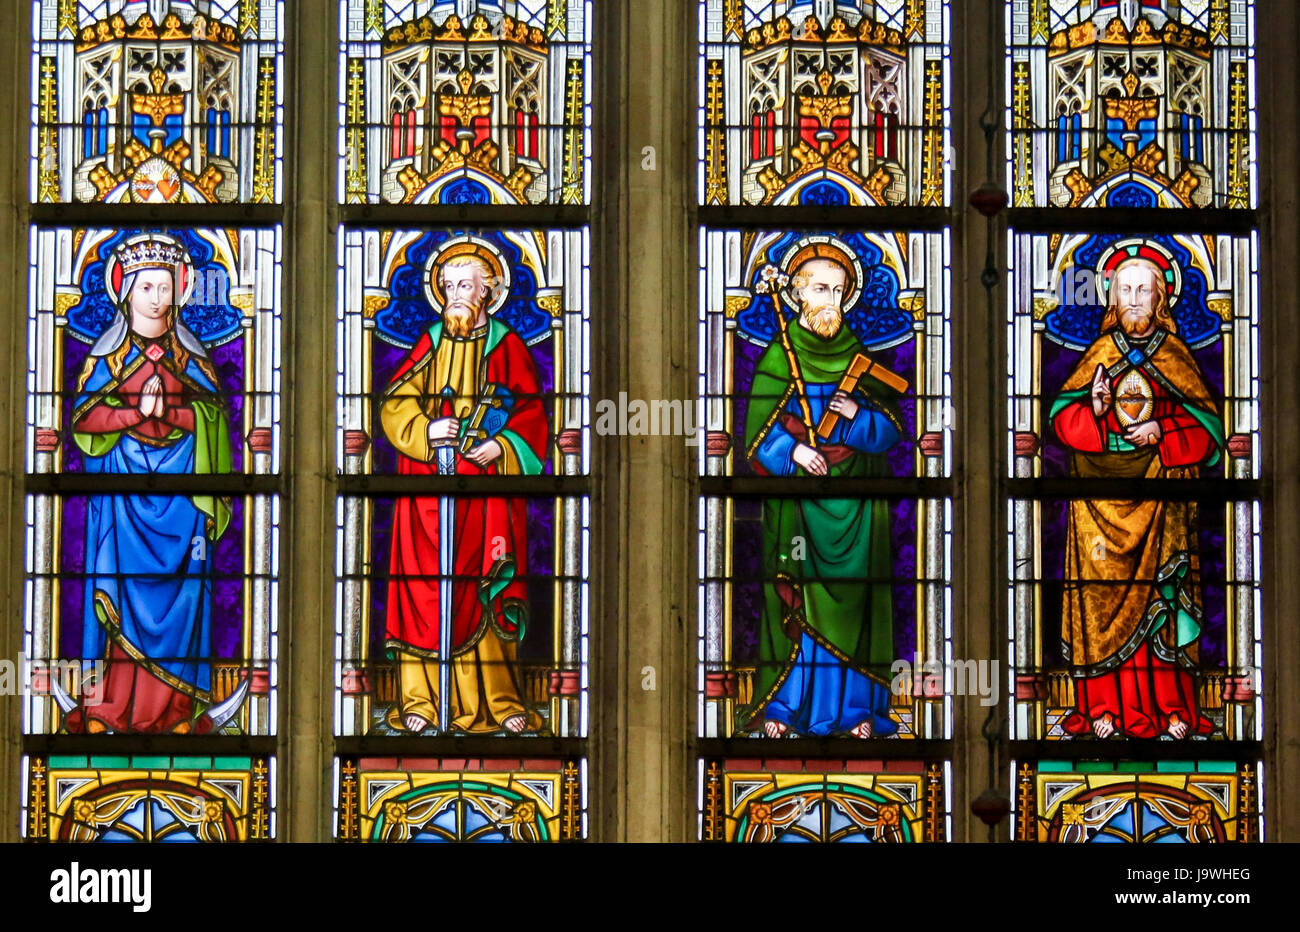 Stained Glass Window Depicting Catholic Saints In The Cathedral Of Saint Bavo In Ghent Flanders Belgium Including Jesus Saint Paul And Saint Josep Stock Photo Alamy